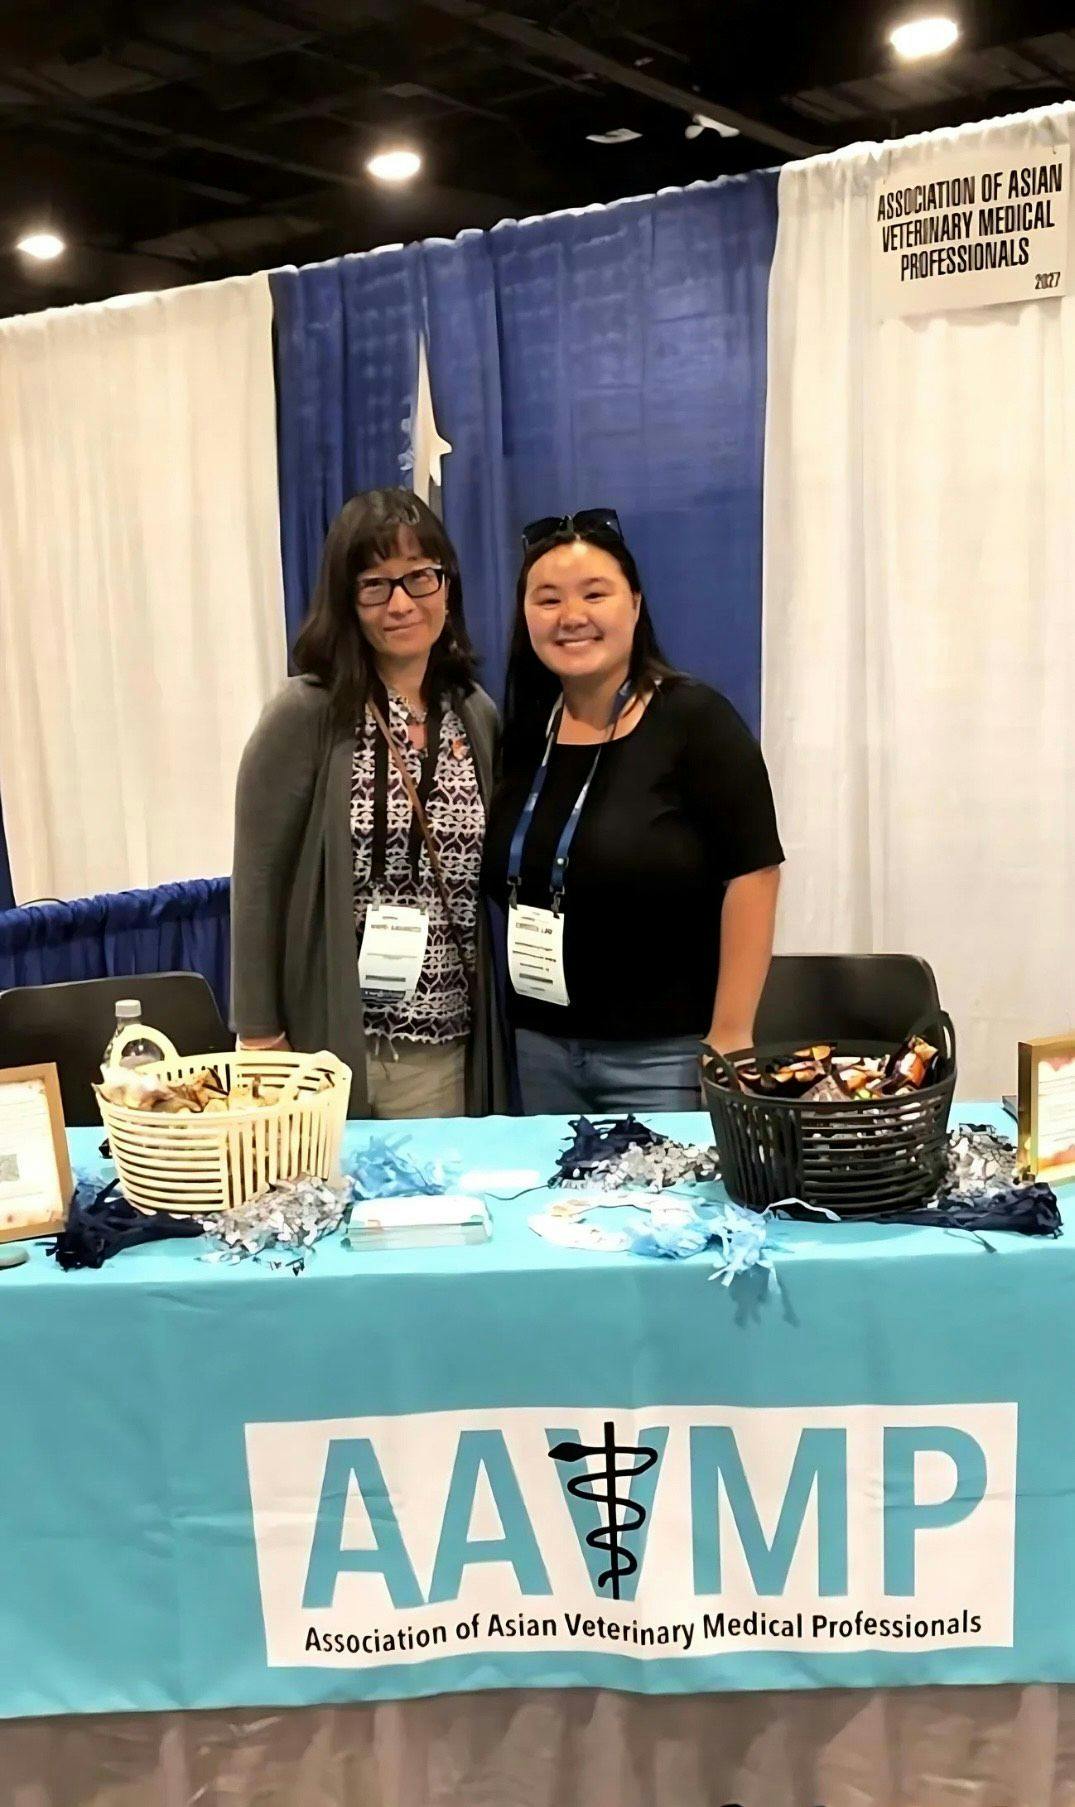 Kaori Sakamoto, current president of AAVMP (left) and Christa Lam (right) digital communications director.